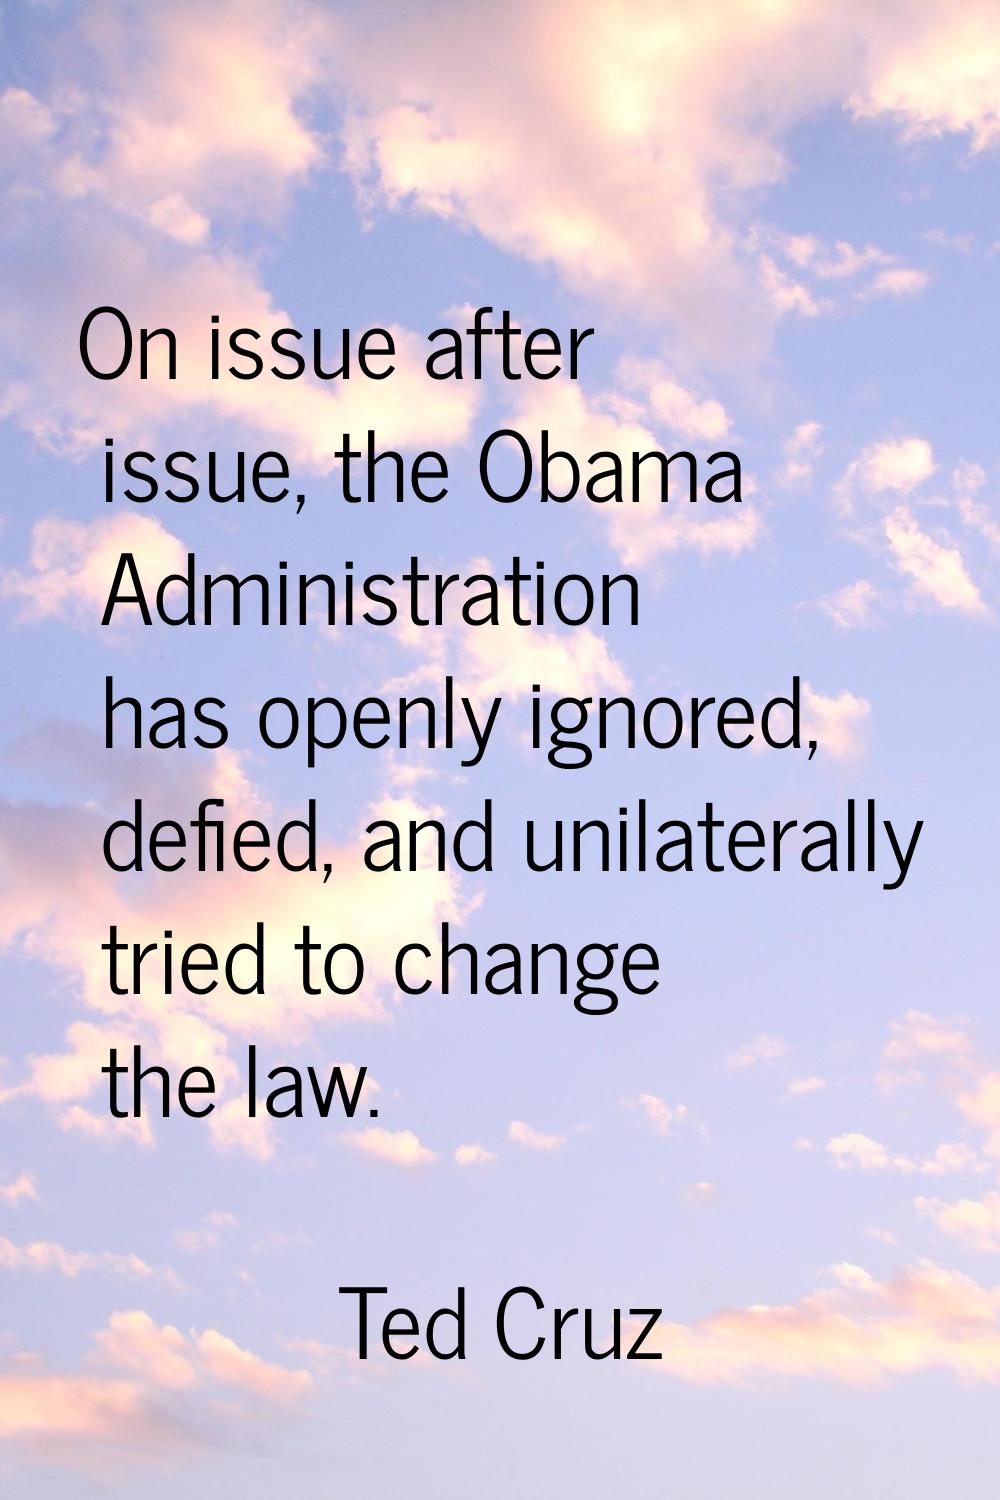 On issue after issue, the Obama Administration has openly ignored, defied, and unilaterally tried t